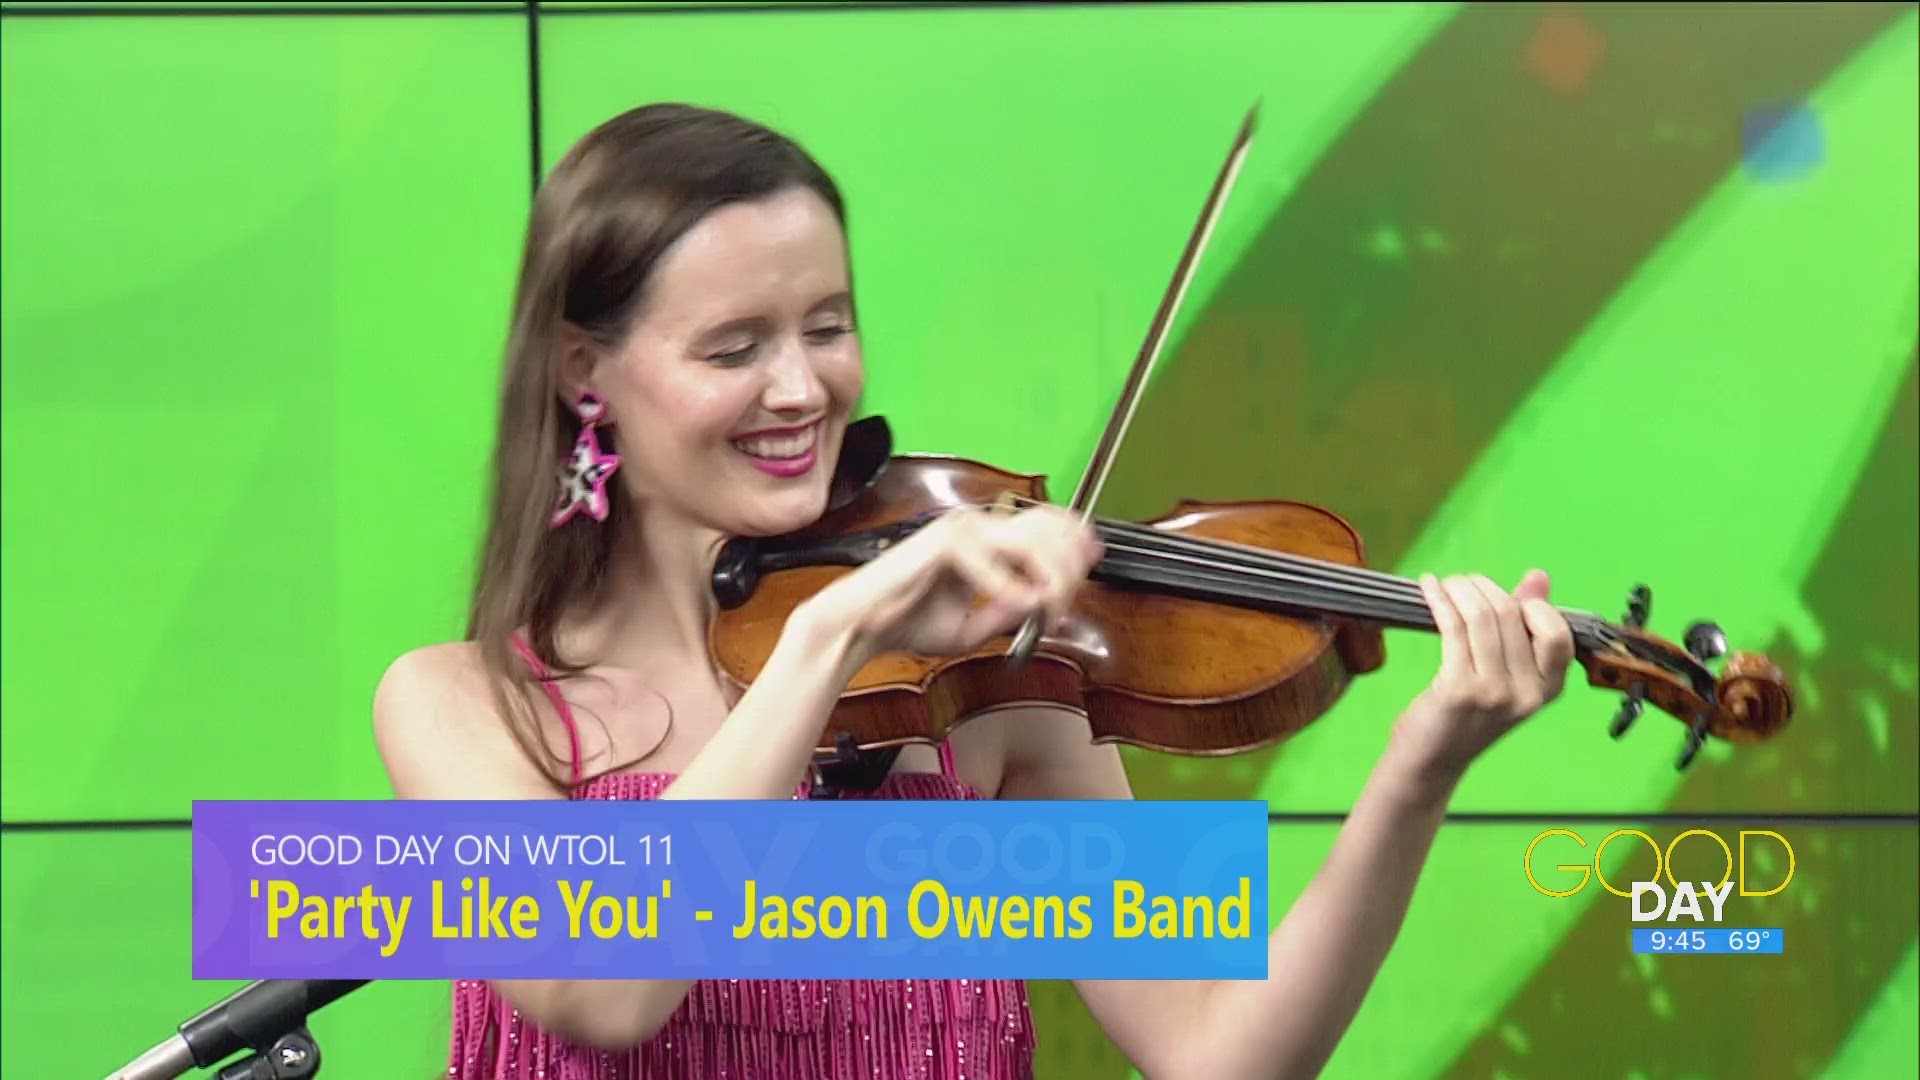 Jason Owens Band, featuring guitar, vocals, percussion and the fiddle, comes to Beer Barrel at Put-In-Bay in late July.